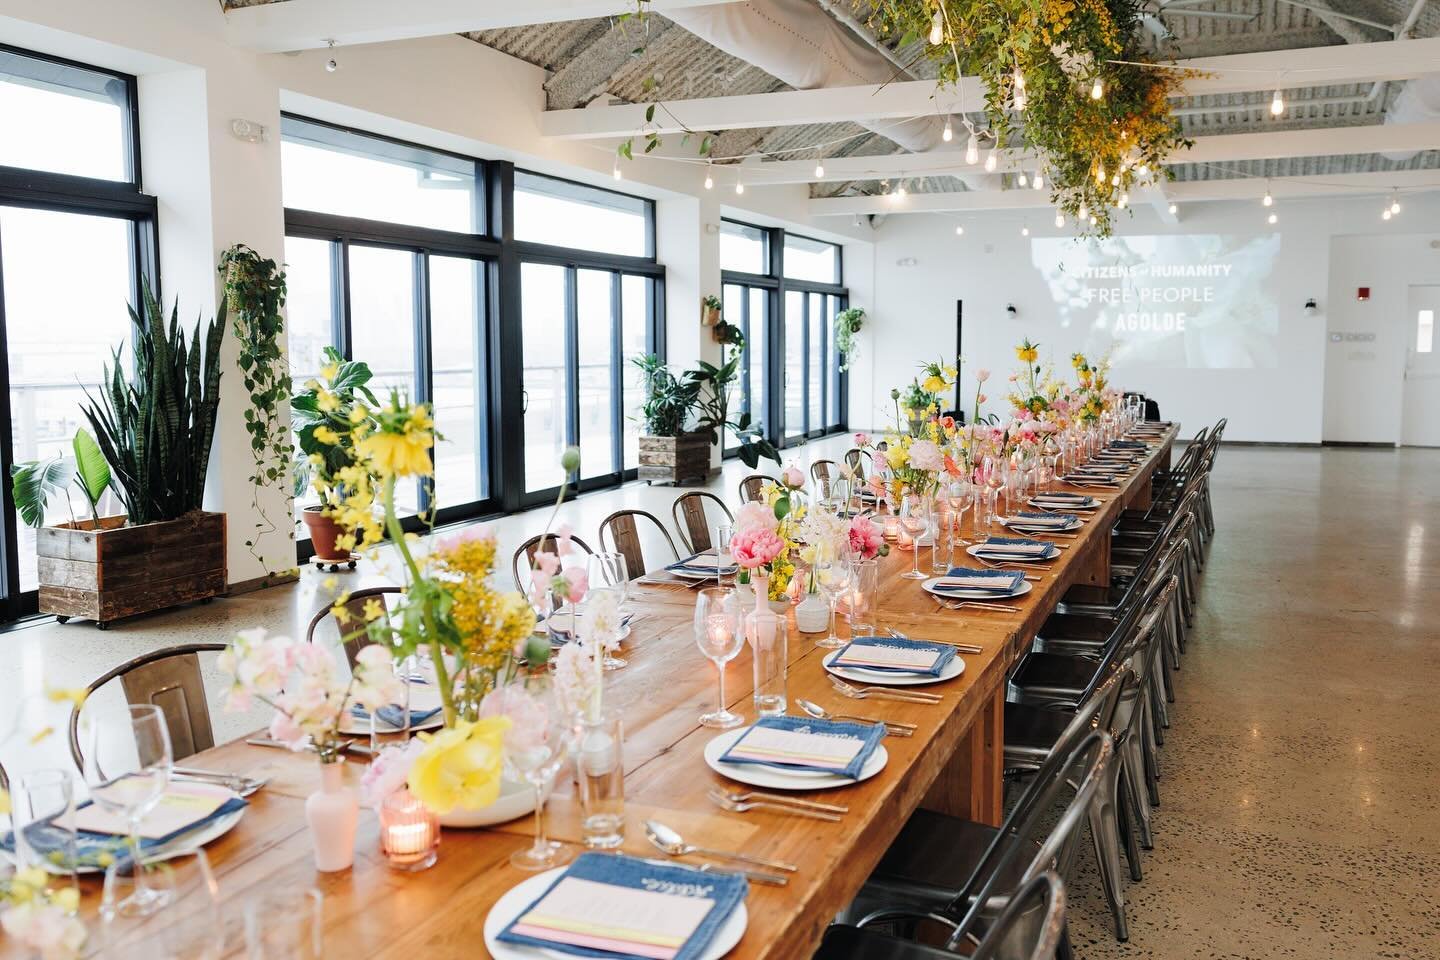 🪻🌼So much spring energy from this beautiful dinner for @freepeople @citizensofhumanity @agolde last week 🪻🌼

Event Production: @greatergood.events 
Florals + Installs: @littlesistercreativenyc
Venue + Bar: @brooklyngrange
Catering + Staffing: @ph